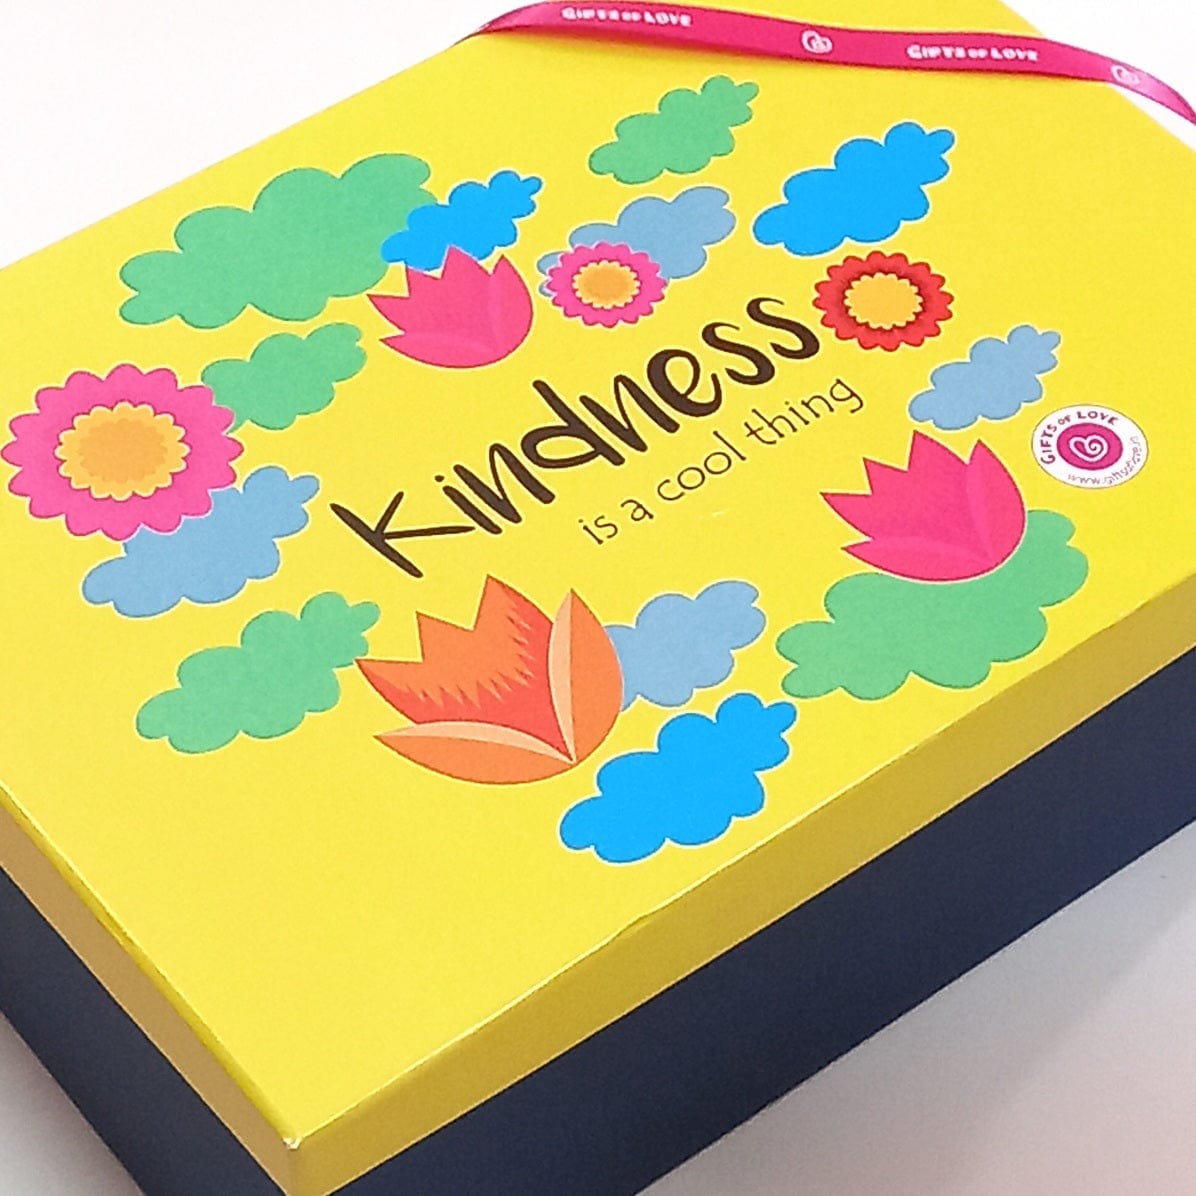 Gifts of Love | Full of Kindness Boxed Gift